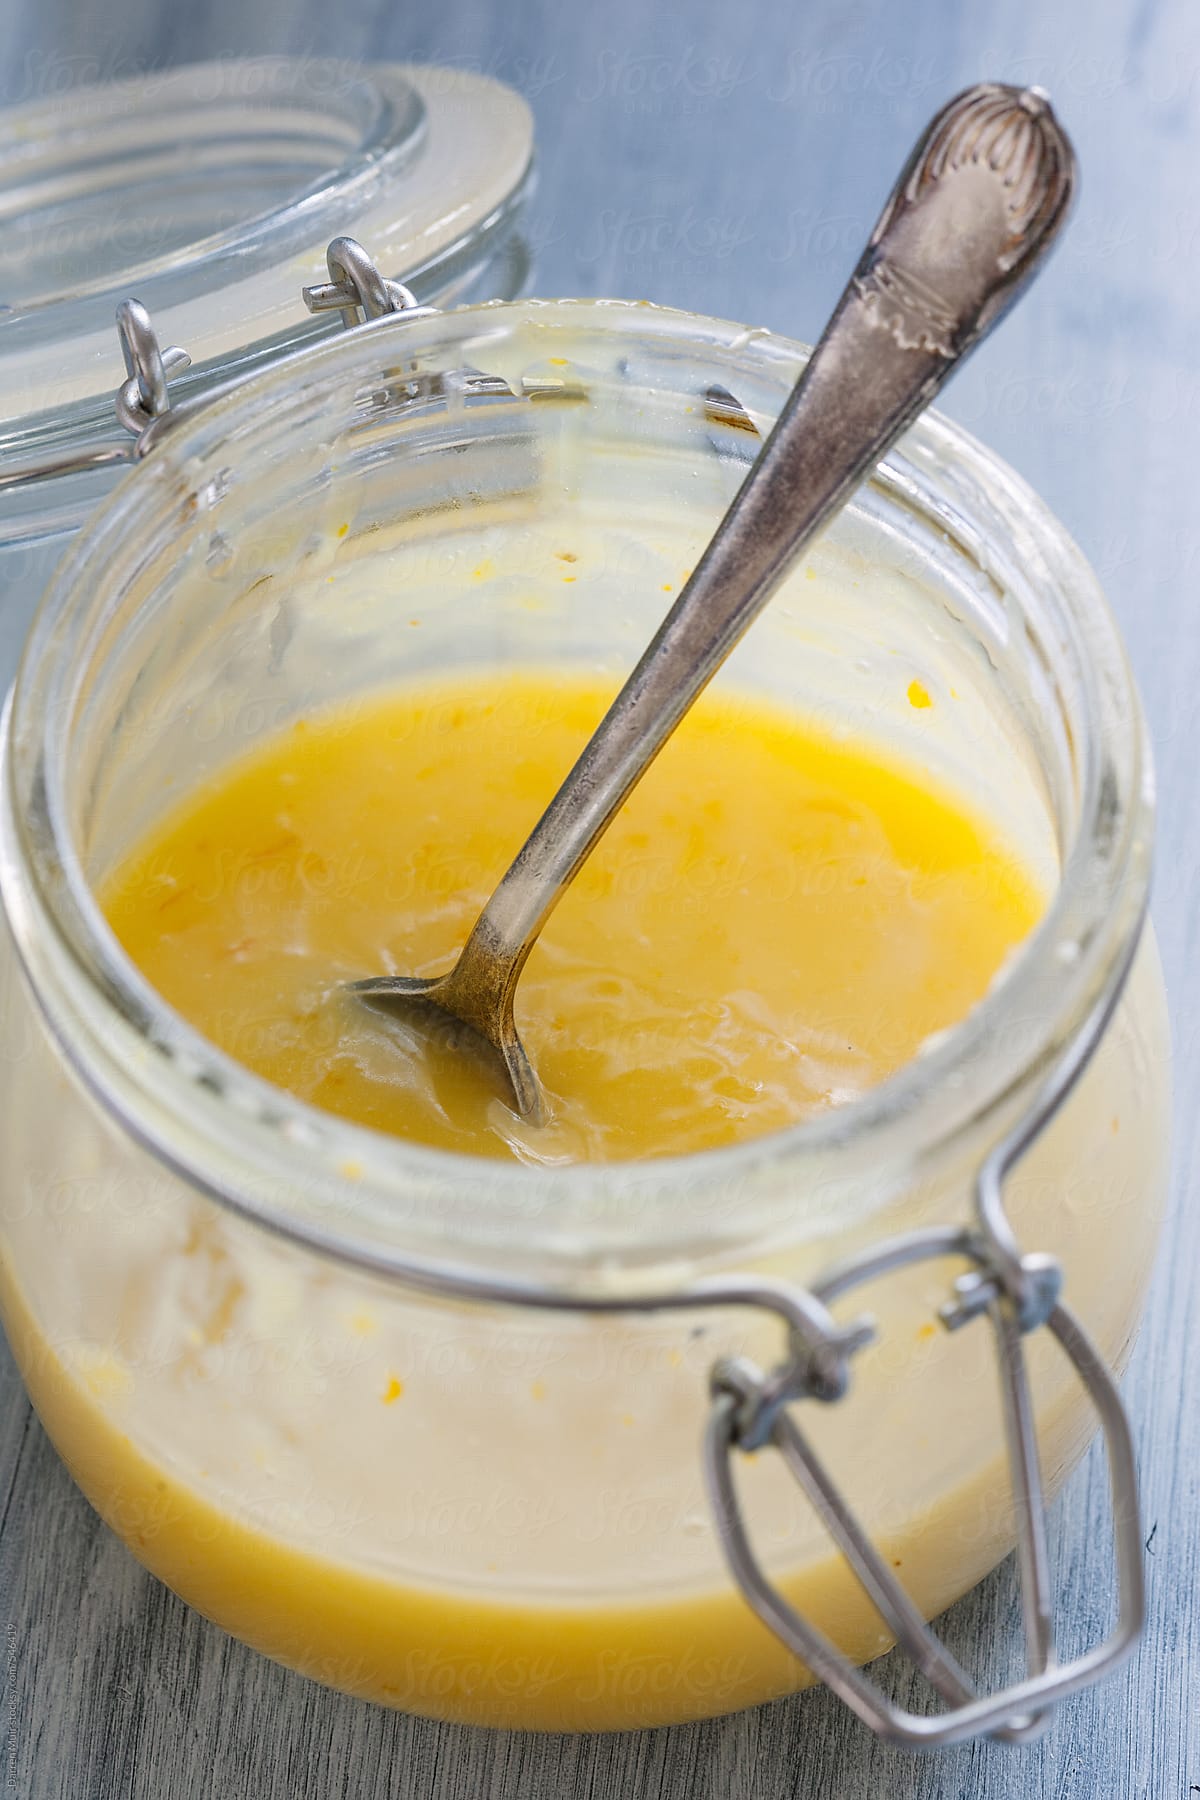 Open jar of homemade orange curd with spoon.